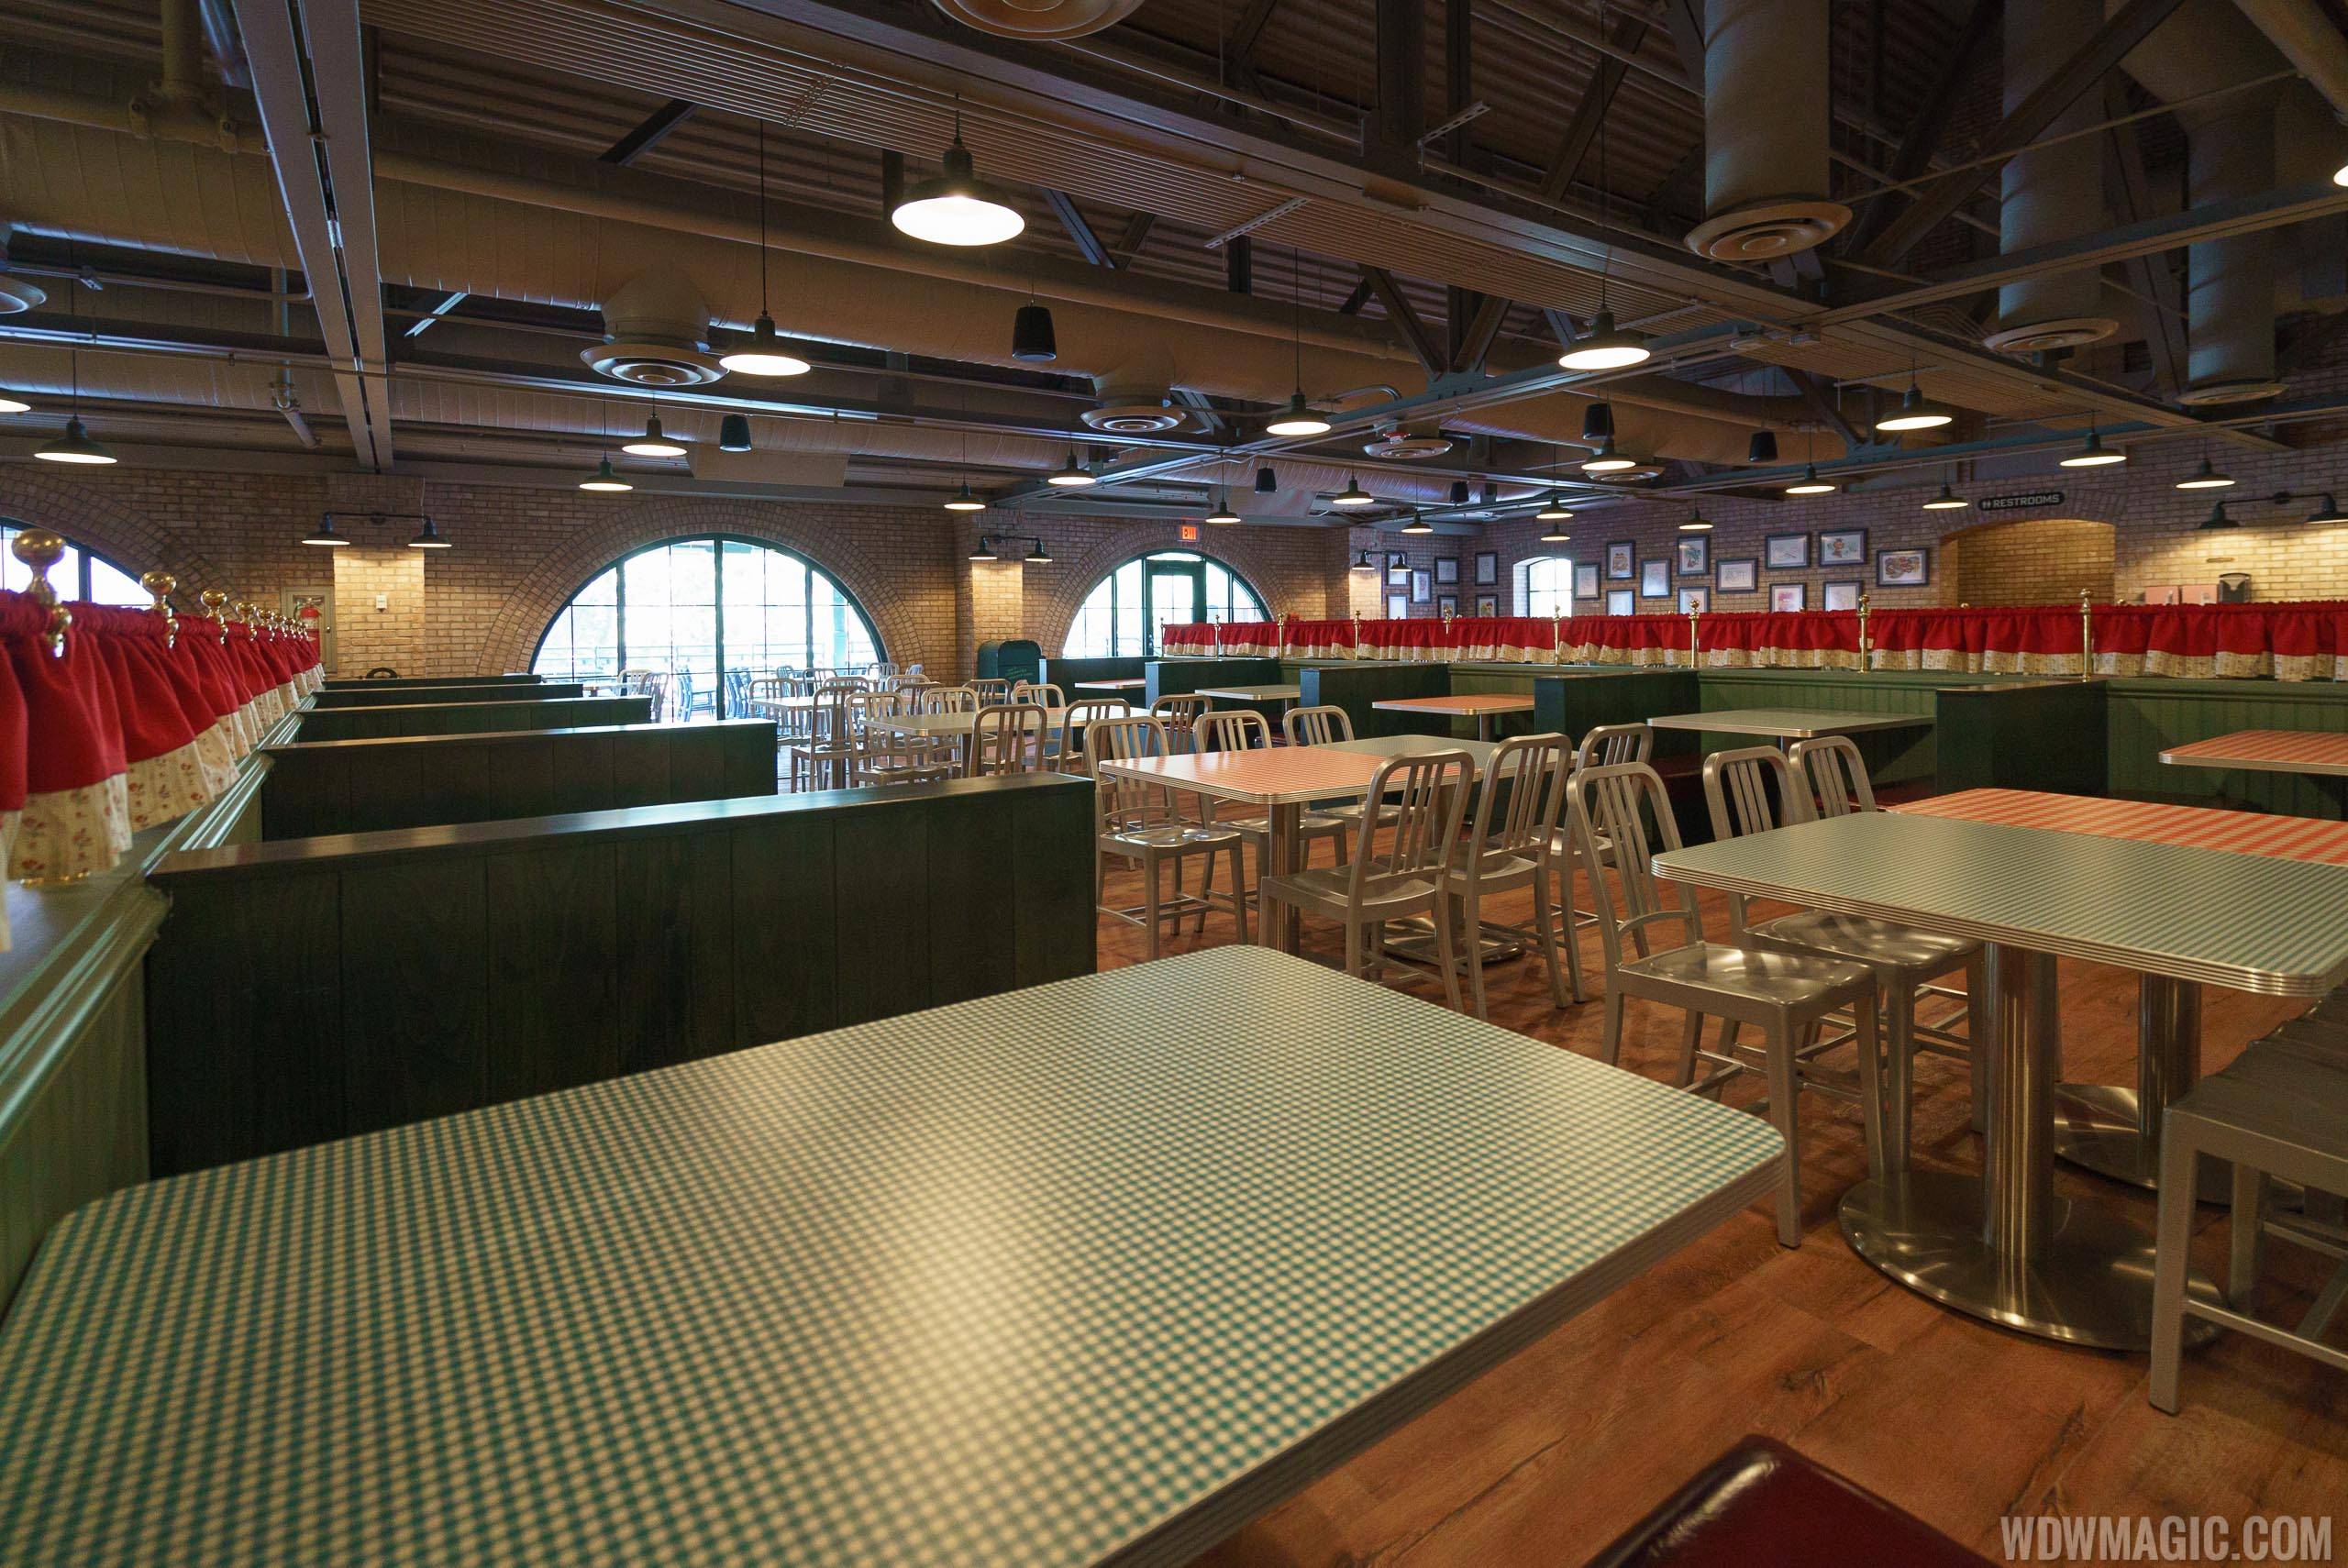 Inside PizzeRizzo - Upper level booths and tables